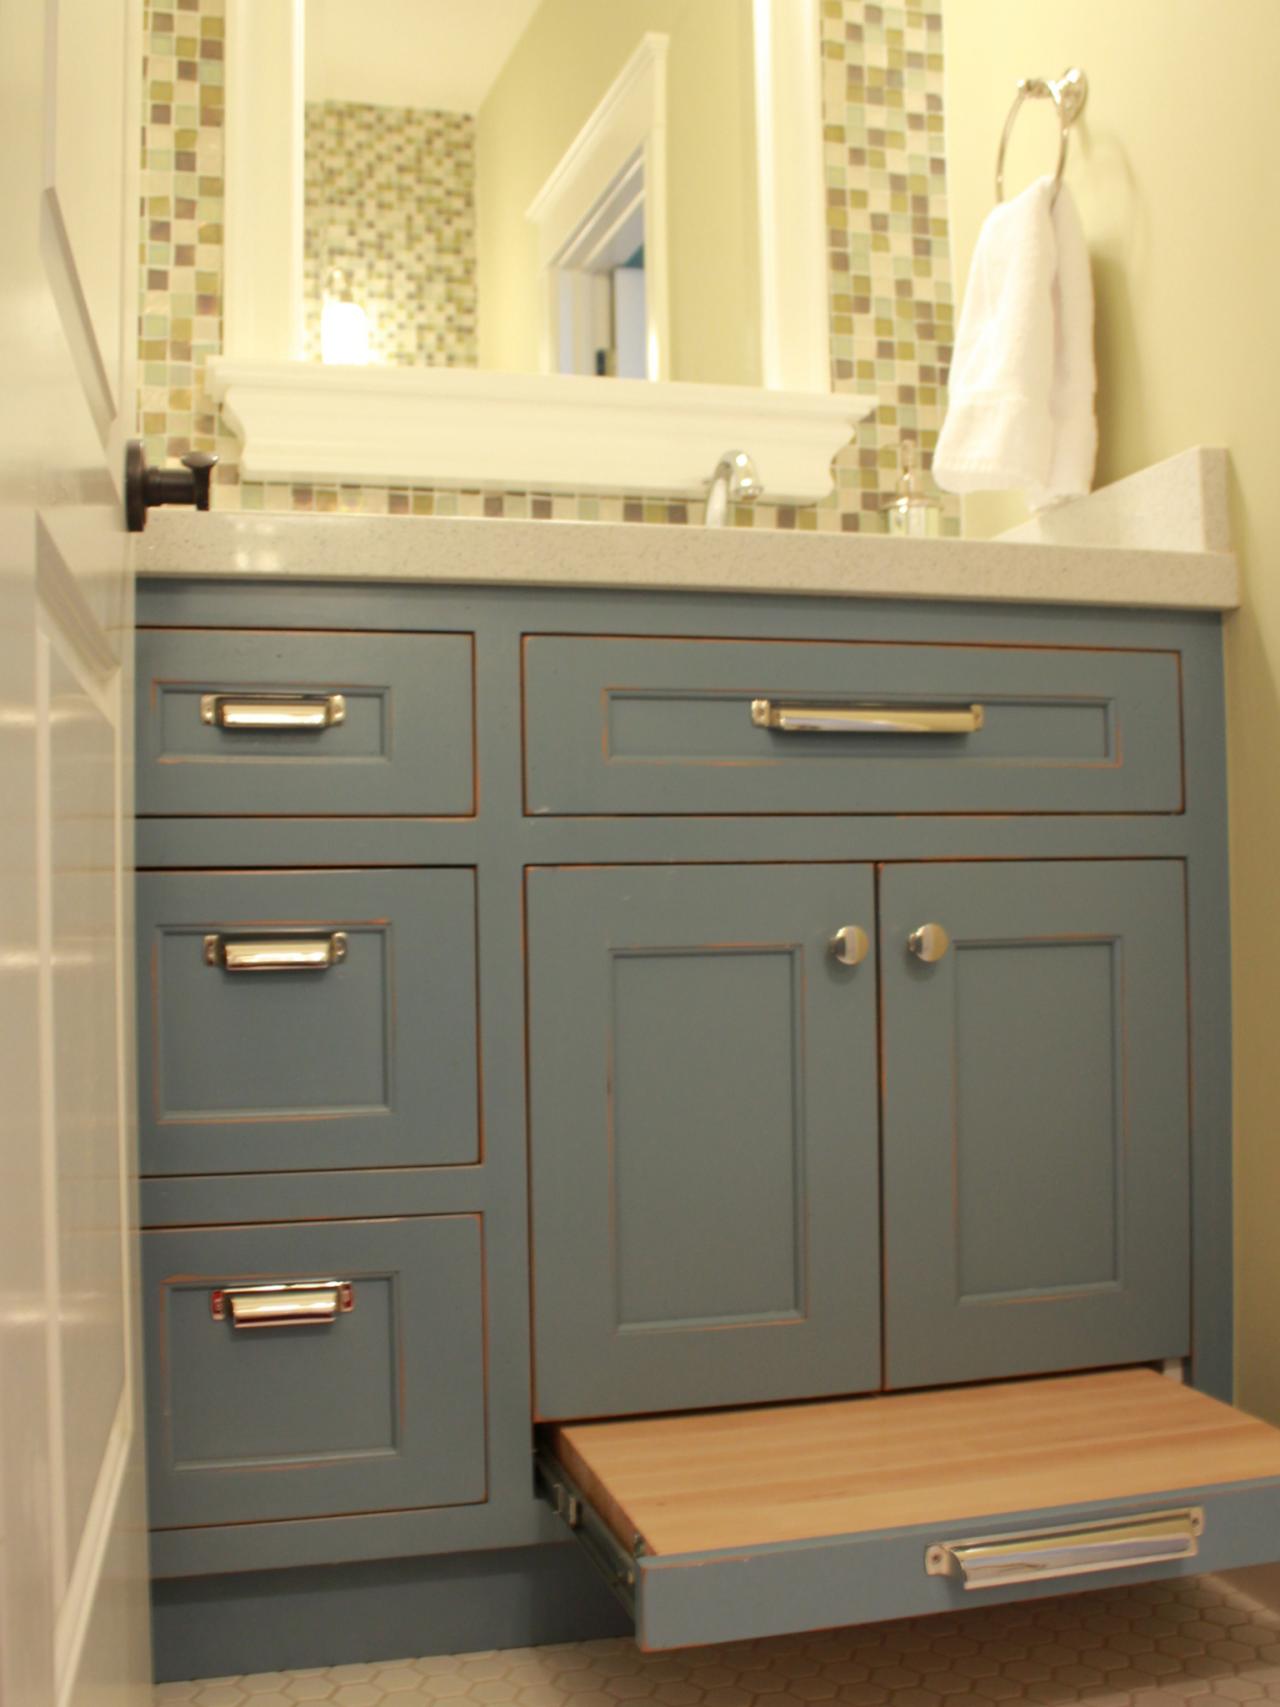 Tutorial For How To Build A Small Bathroom Vanity With Turned Legs